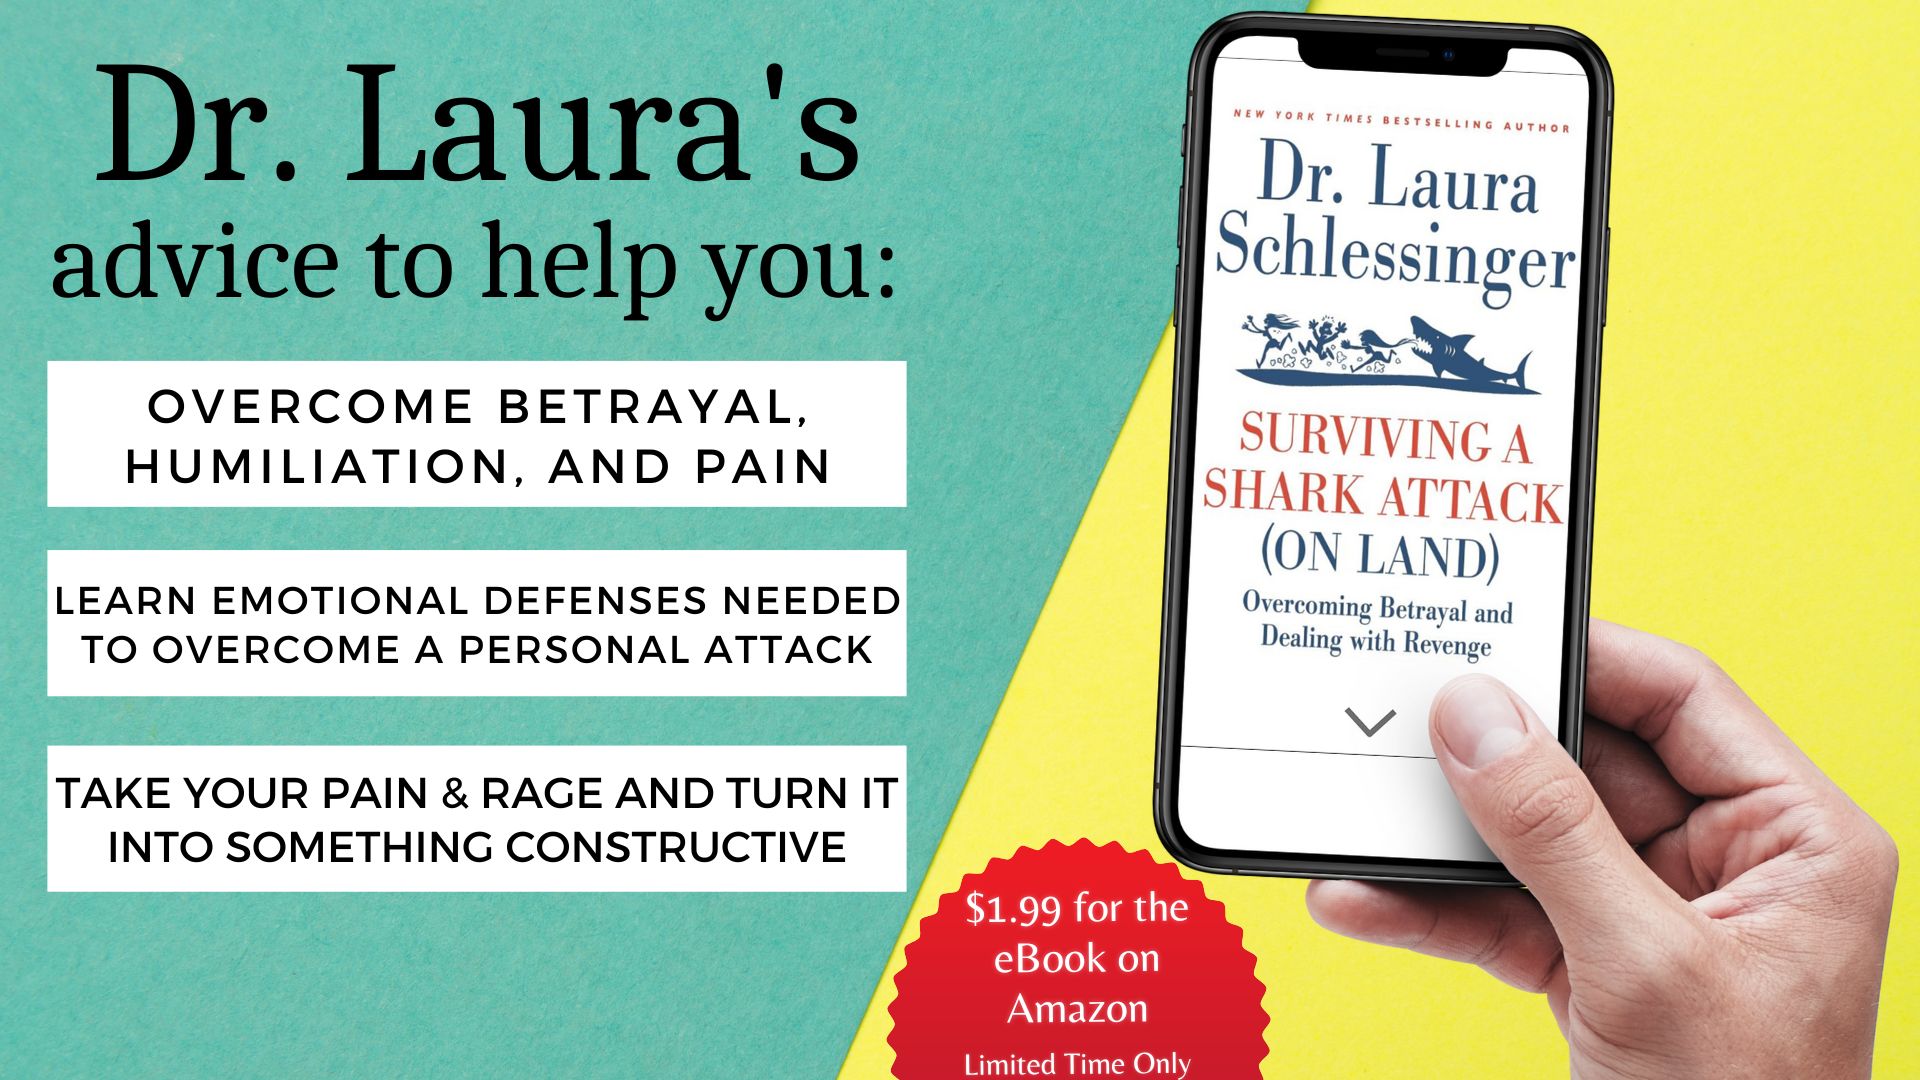 My Book: Surviving a Shark Attack (On Land)